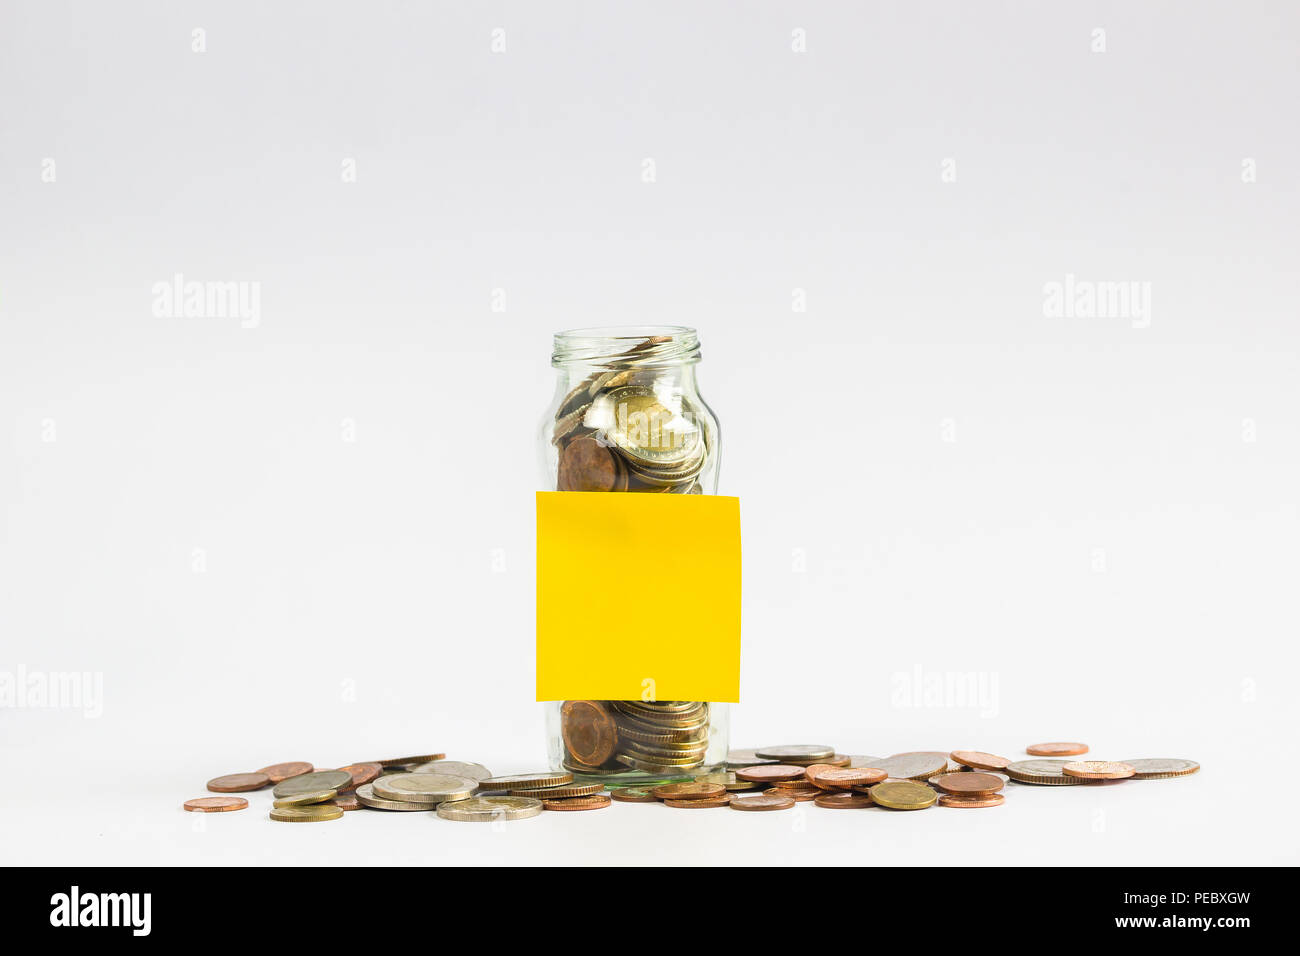 Savings, Investment growing money concept : A full coins in a clear glass jar with a empty yellow post paper and a coin on the floor on white backgrou Stock Photo